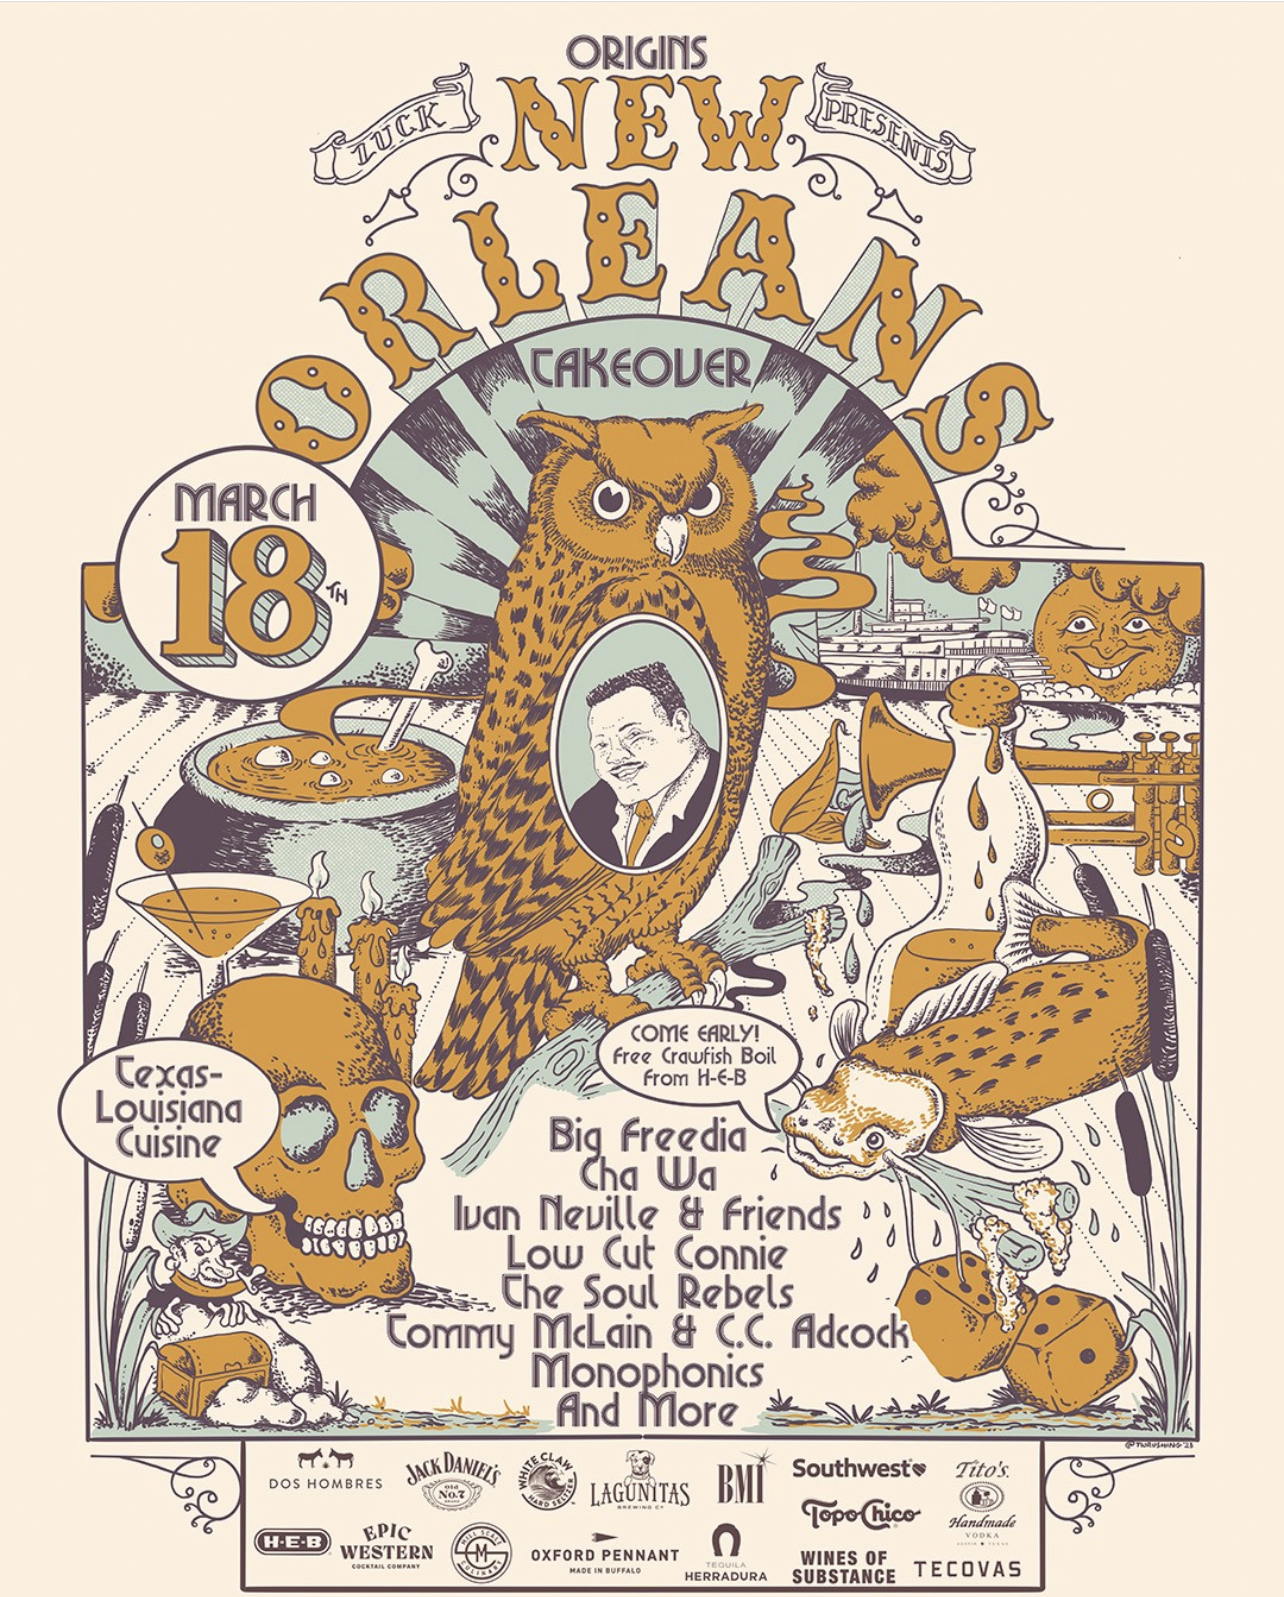 Luck Origins: New Orleans Takeover flyer